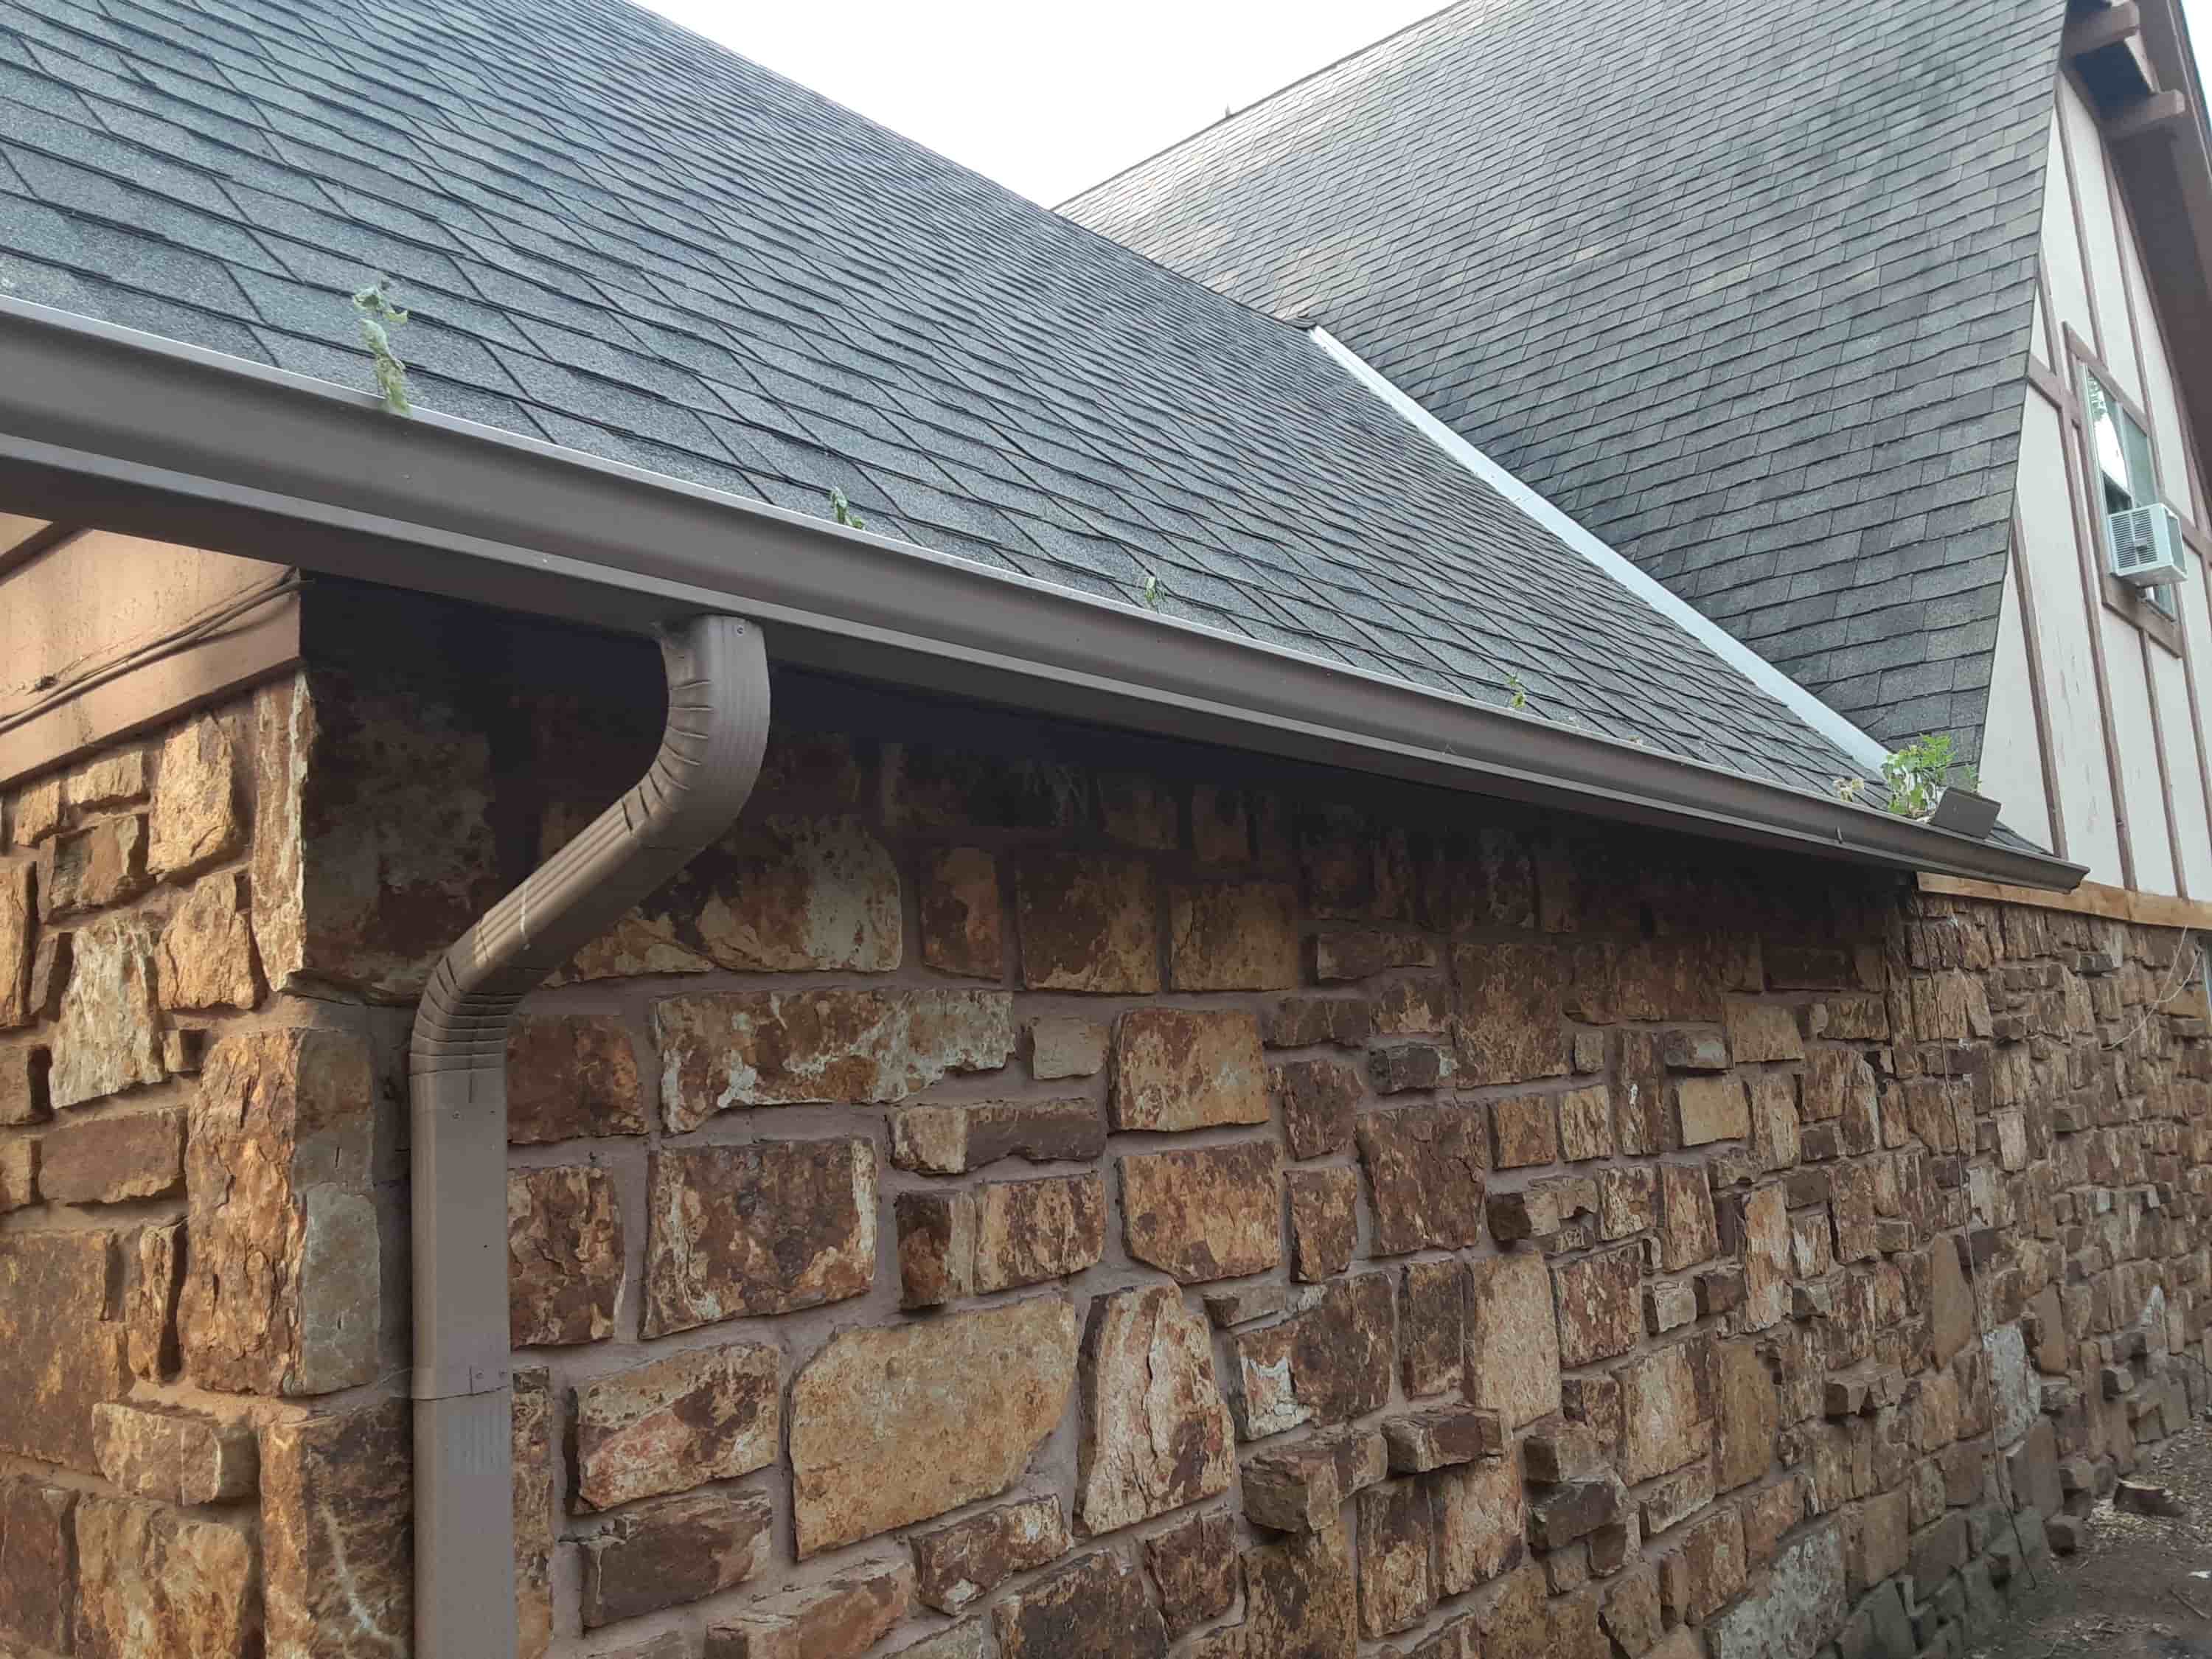 gutter cleaning solutions